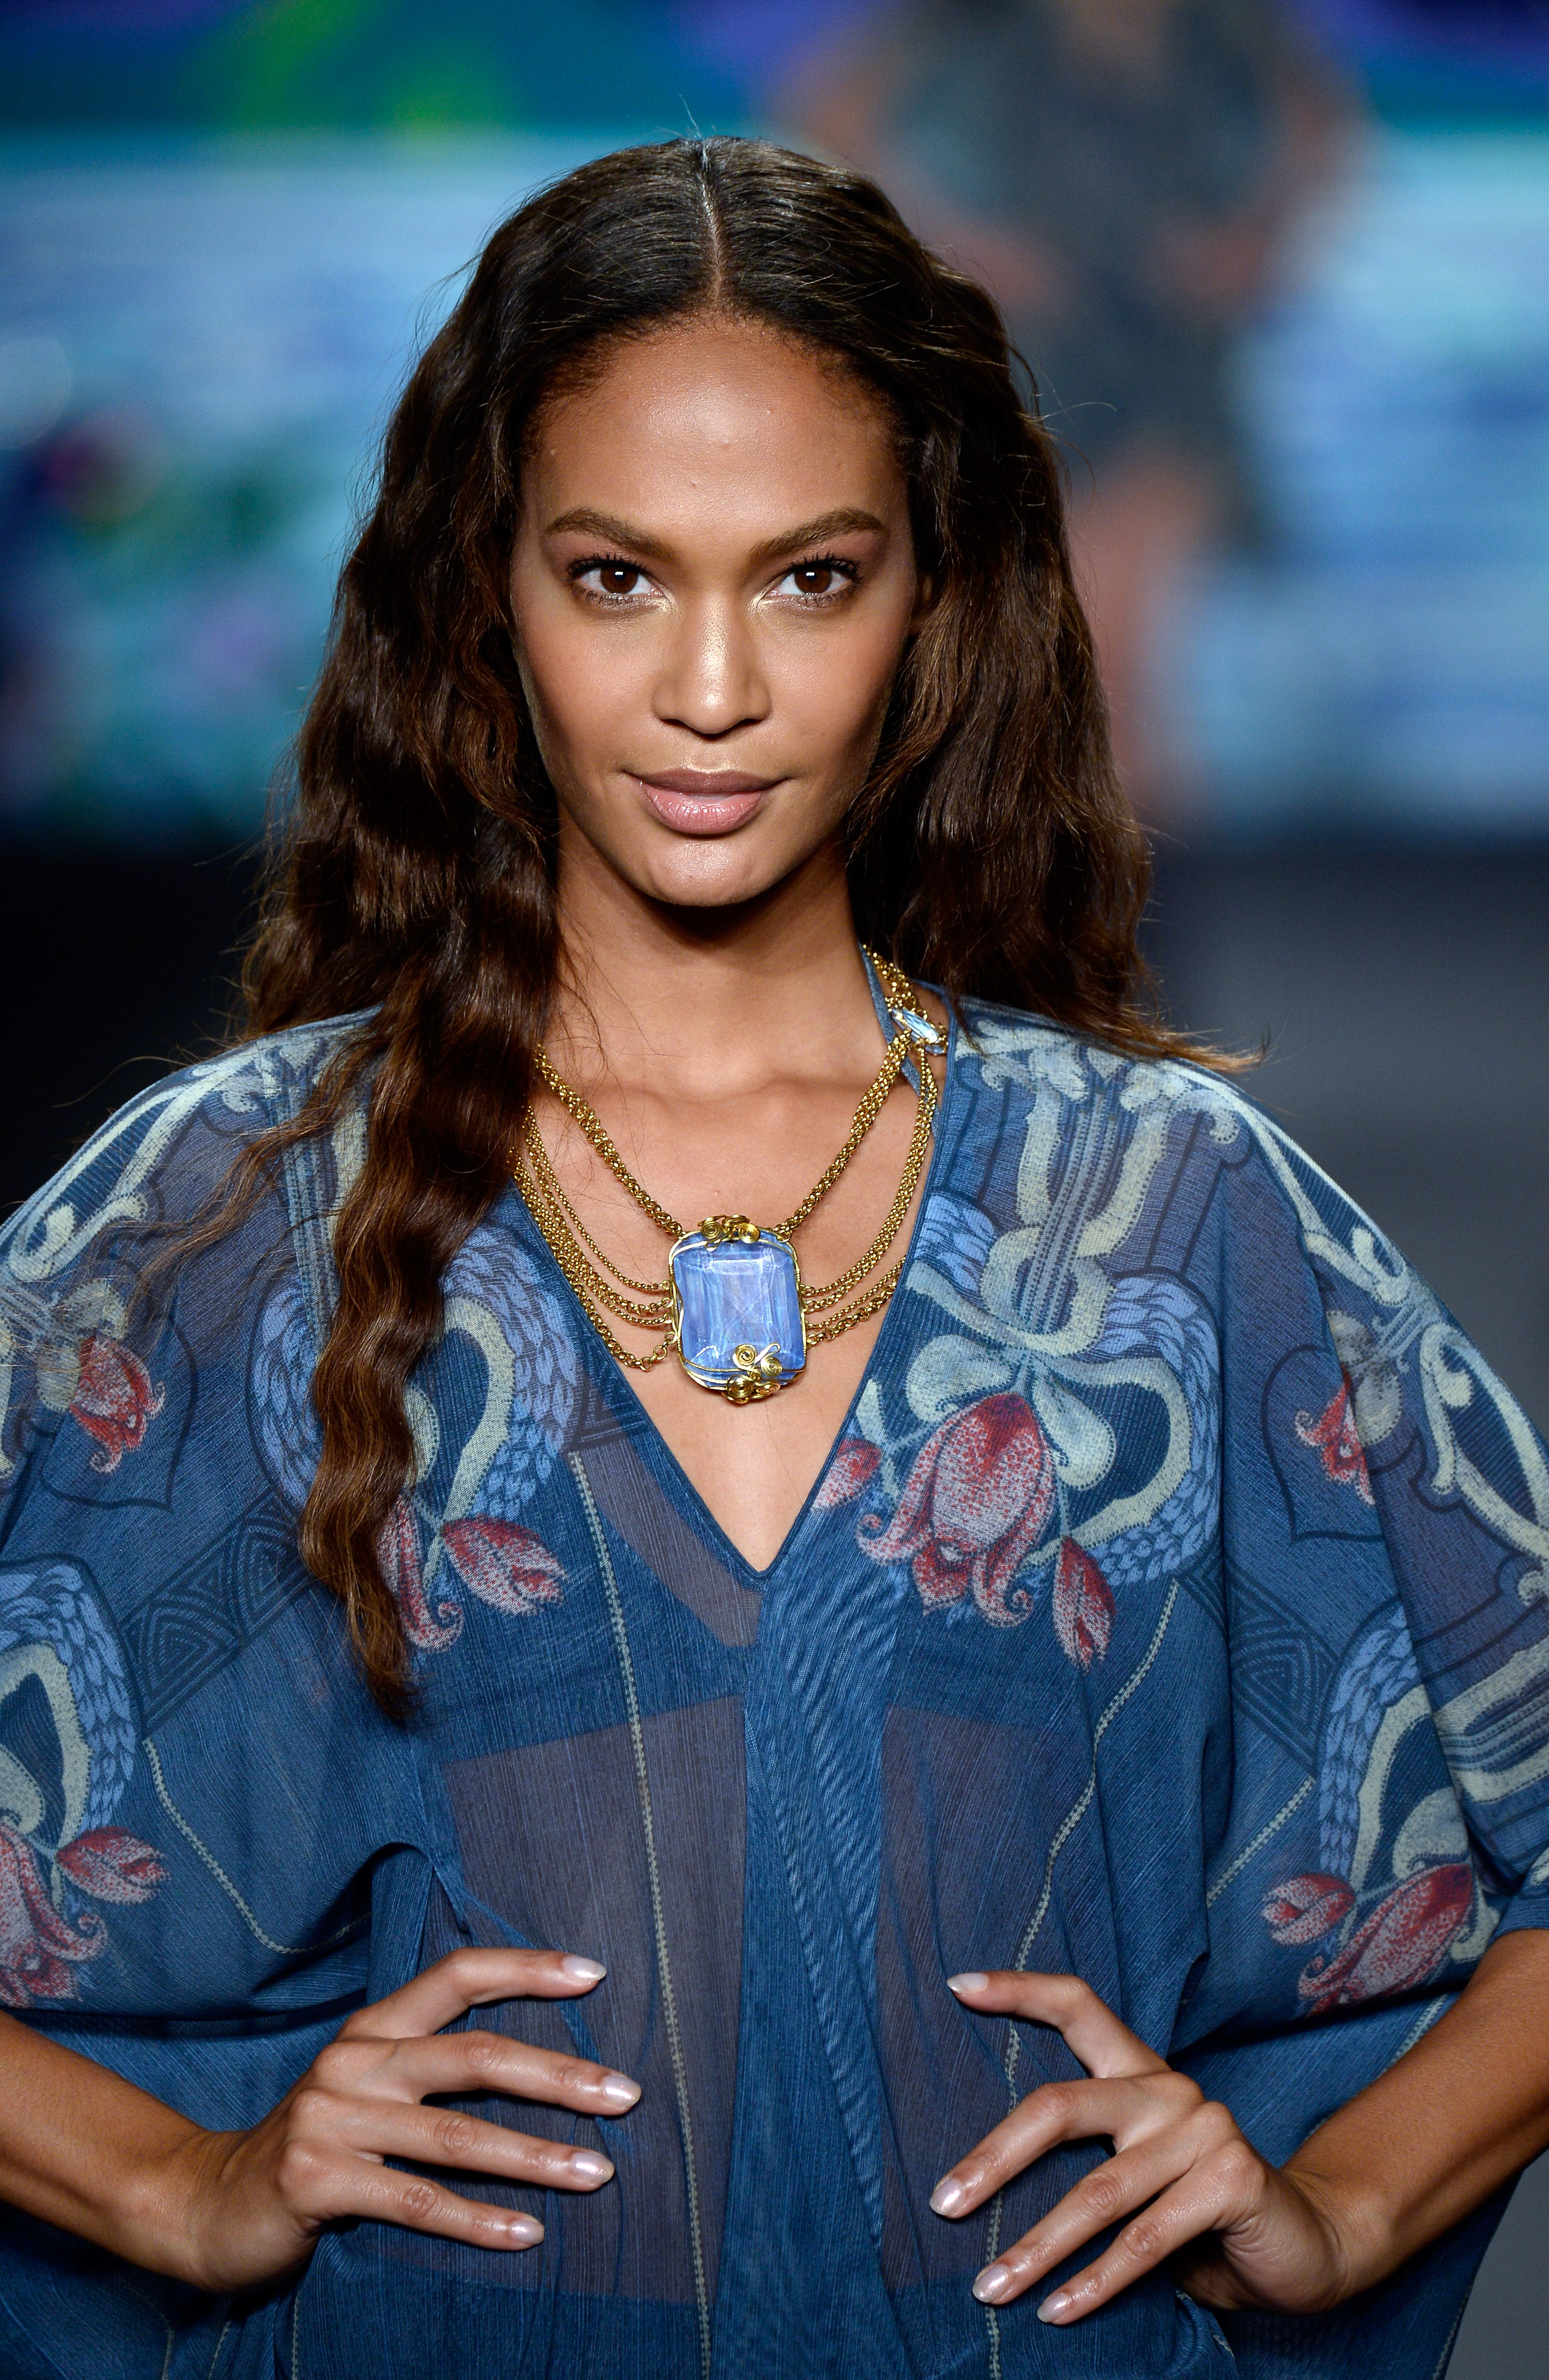 Awesome photos of famous Model  Joan  Smalls  BOOMSbeat